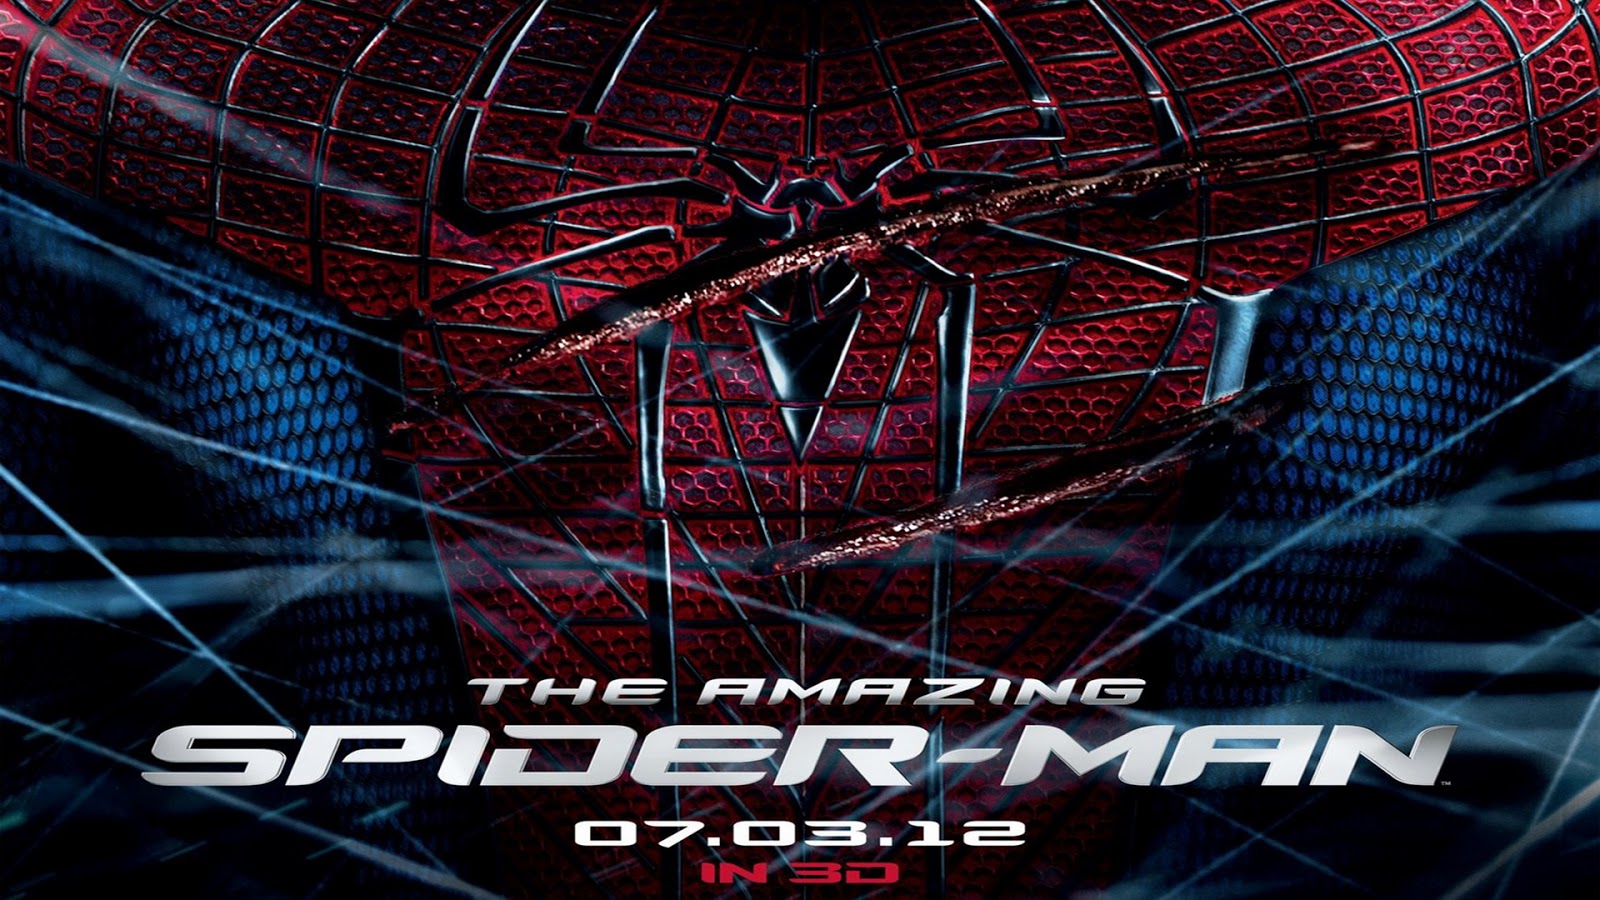  wallpapers The Amazing Spiderman 2012 1080p HD Wallpapers 1920x1080 1600x900